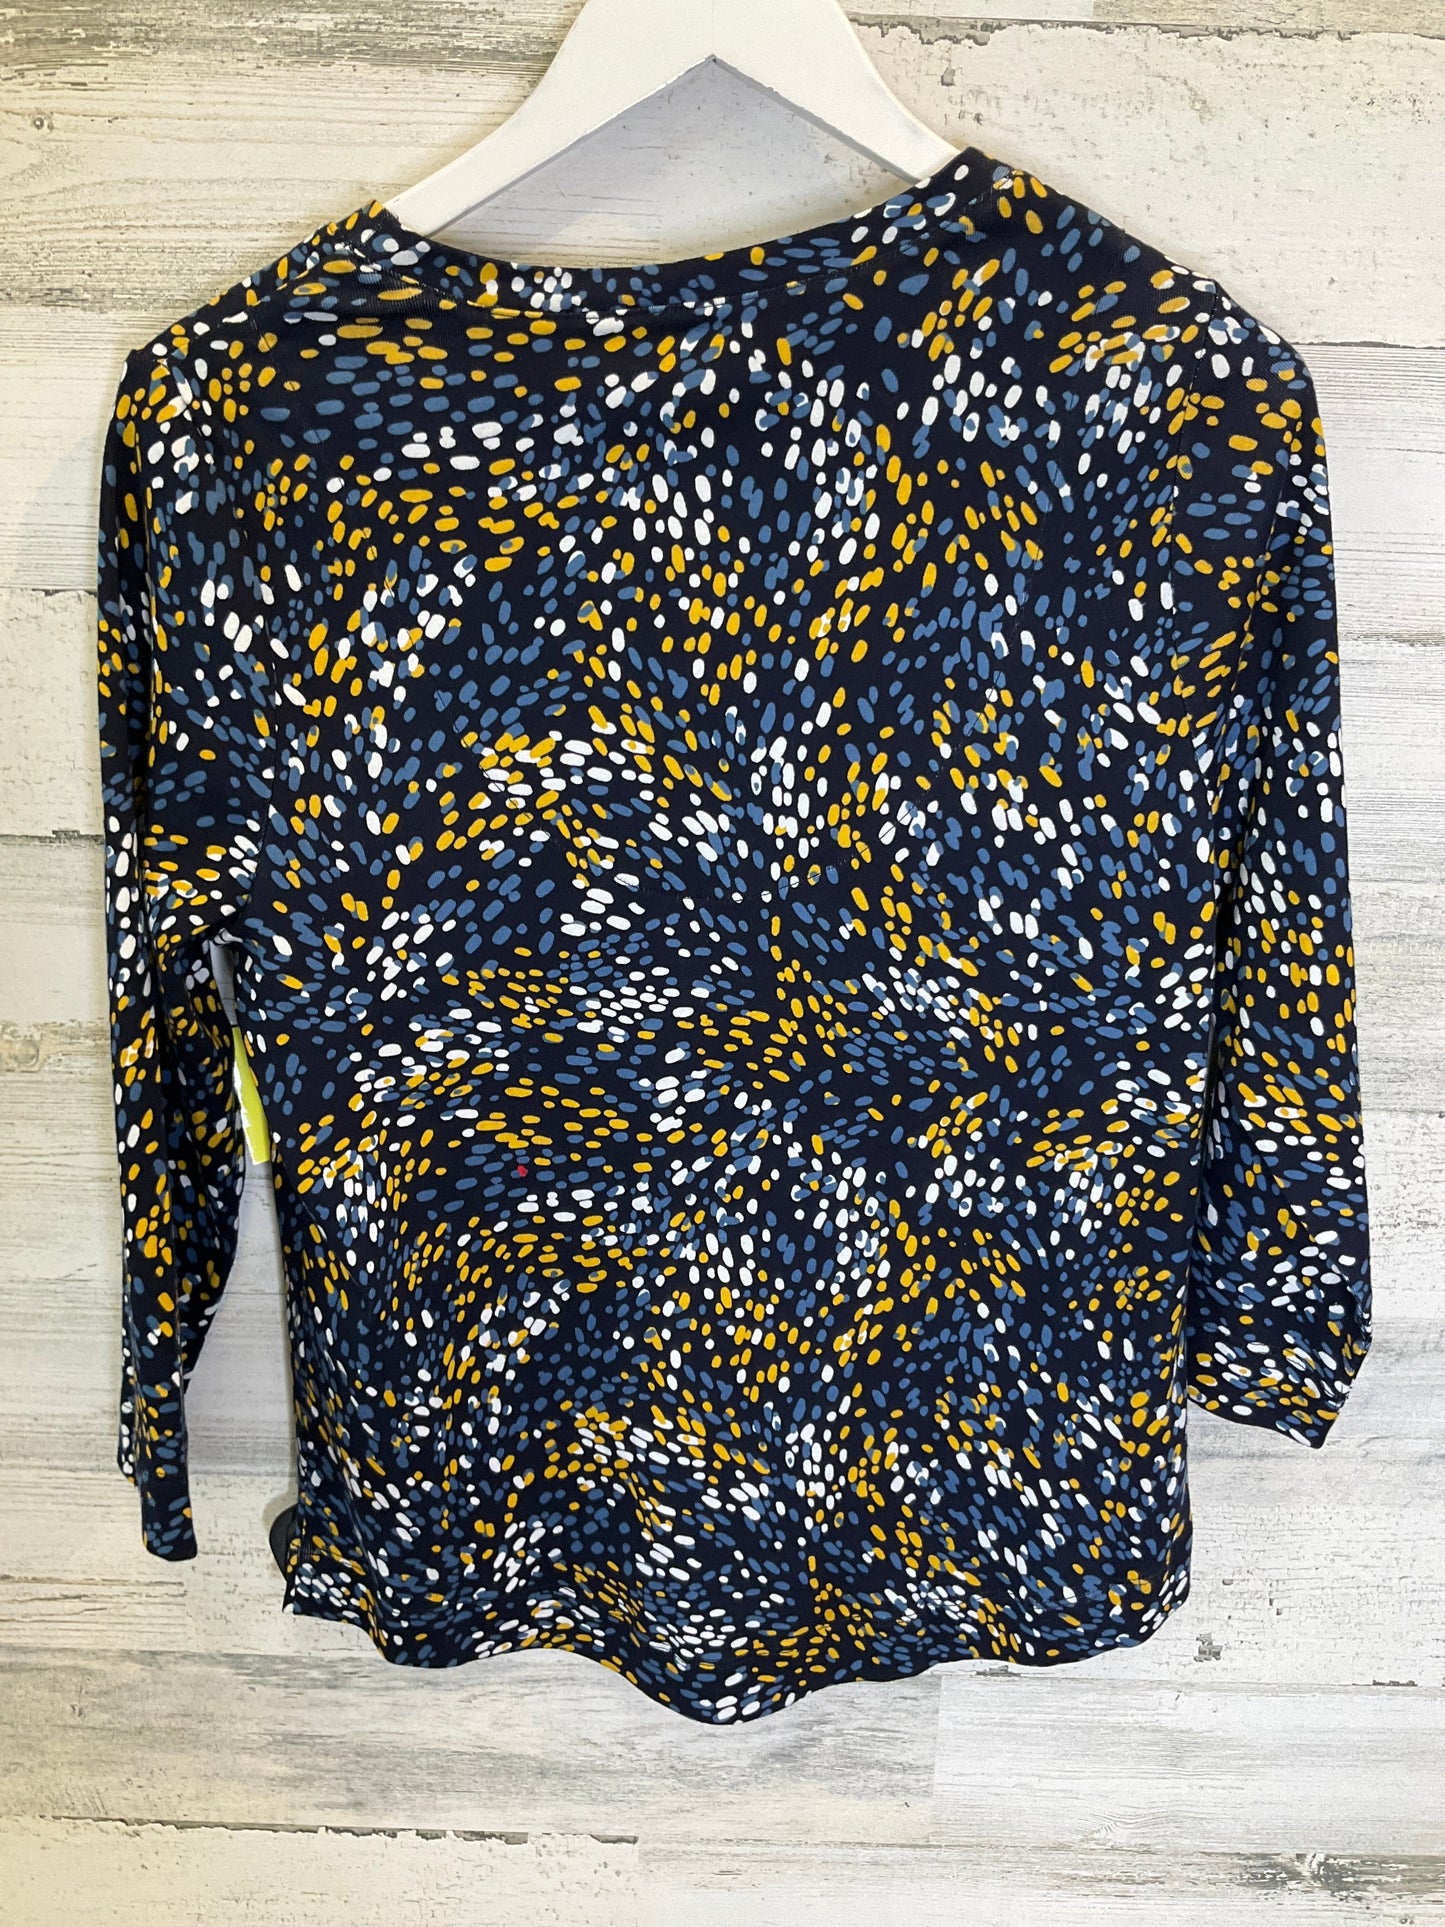 Blue Top 3/4 Sleeve Chicos, Size M